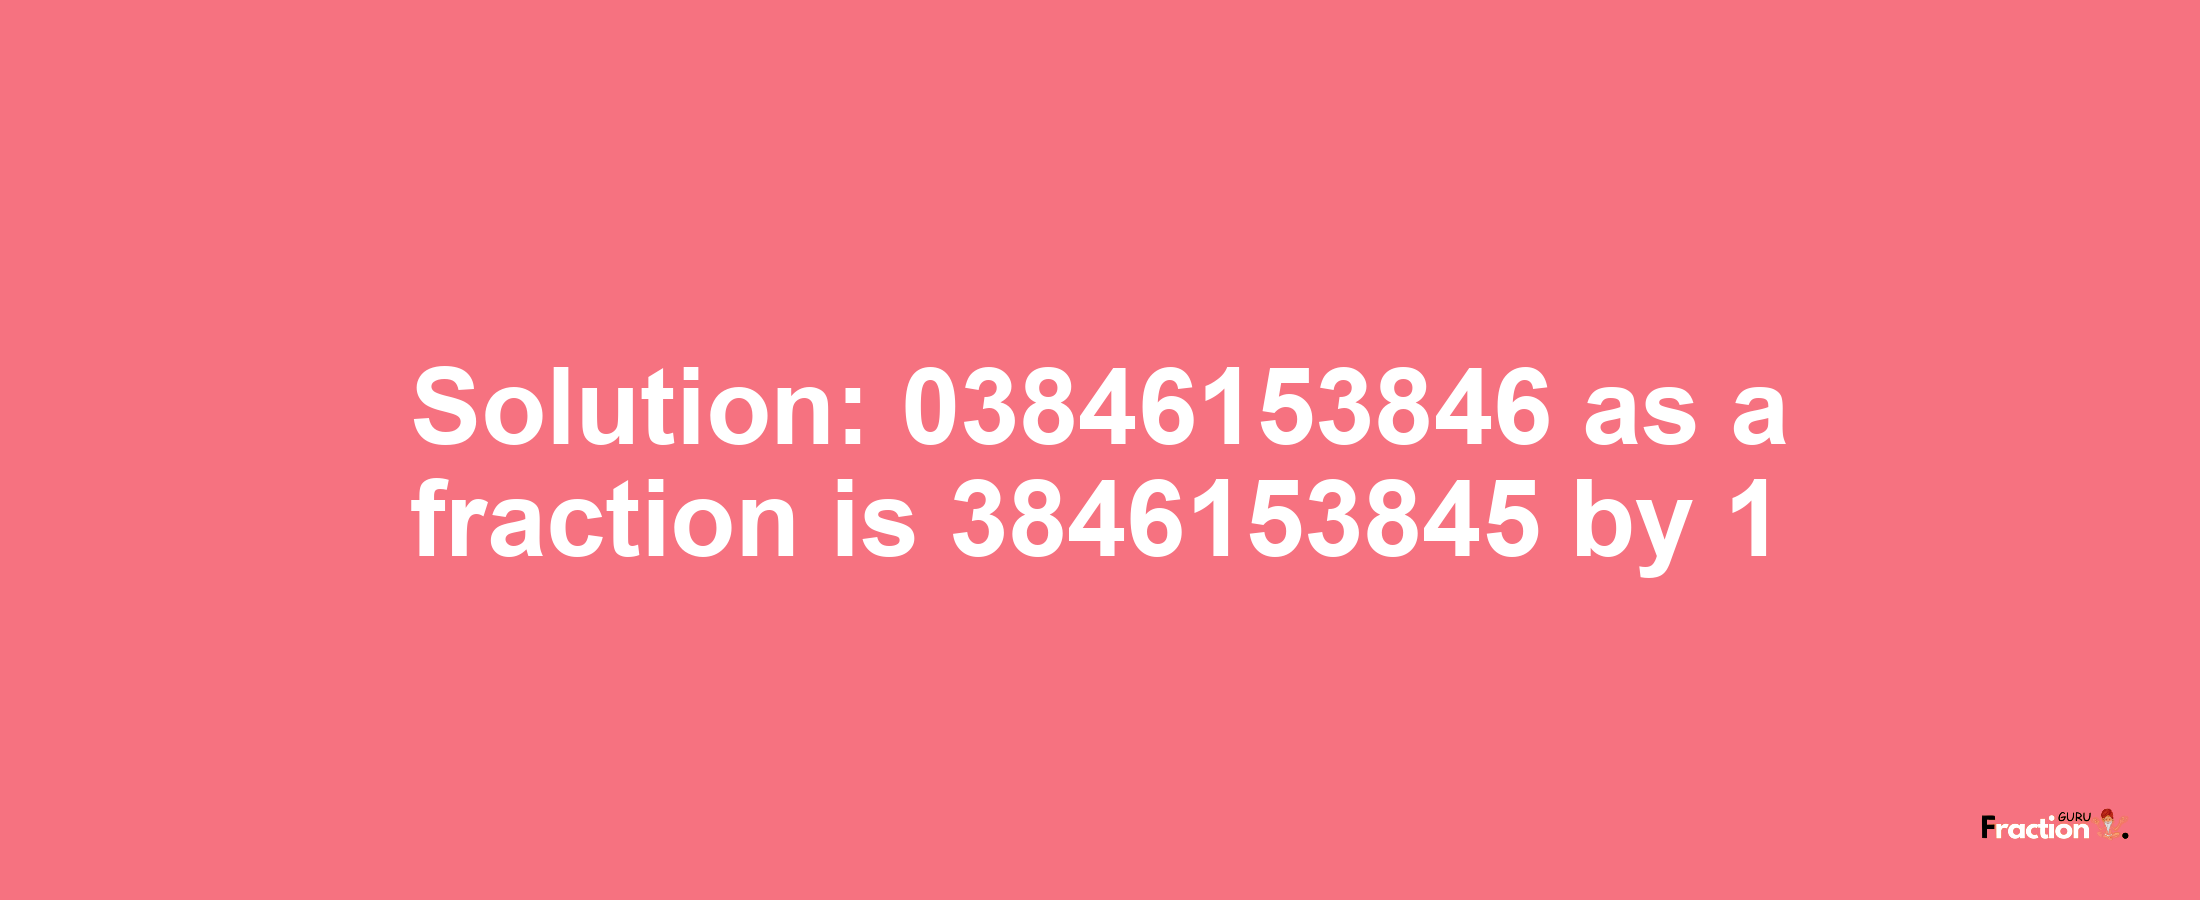 Solution:03846153846 as a fraction is 3846153845/1